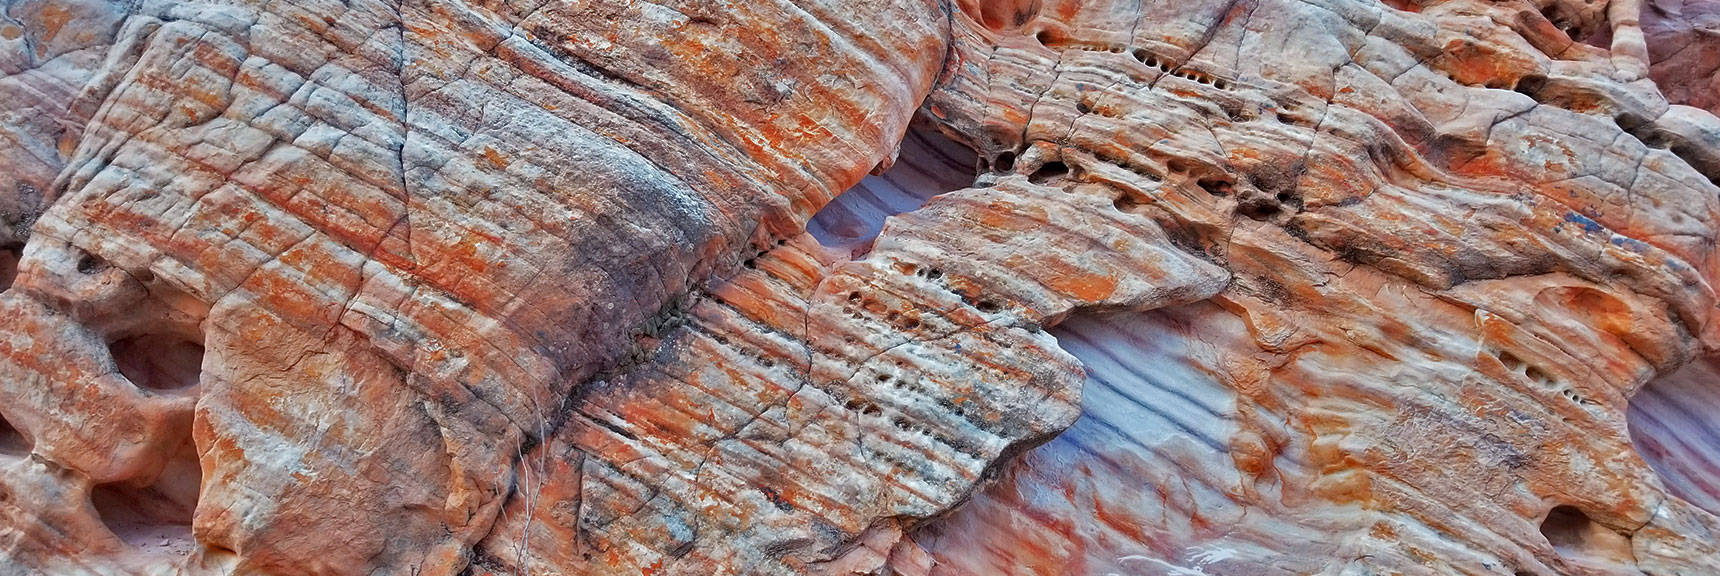 Colorful Fire Wave Rock Formations in the Northern Canyon Wash on Prospect Trail in Valley of Fire State Park, Nevada